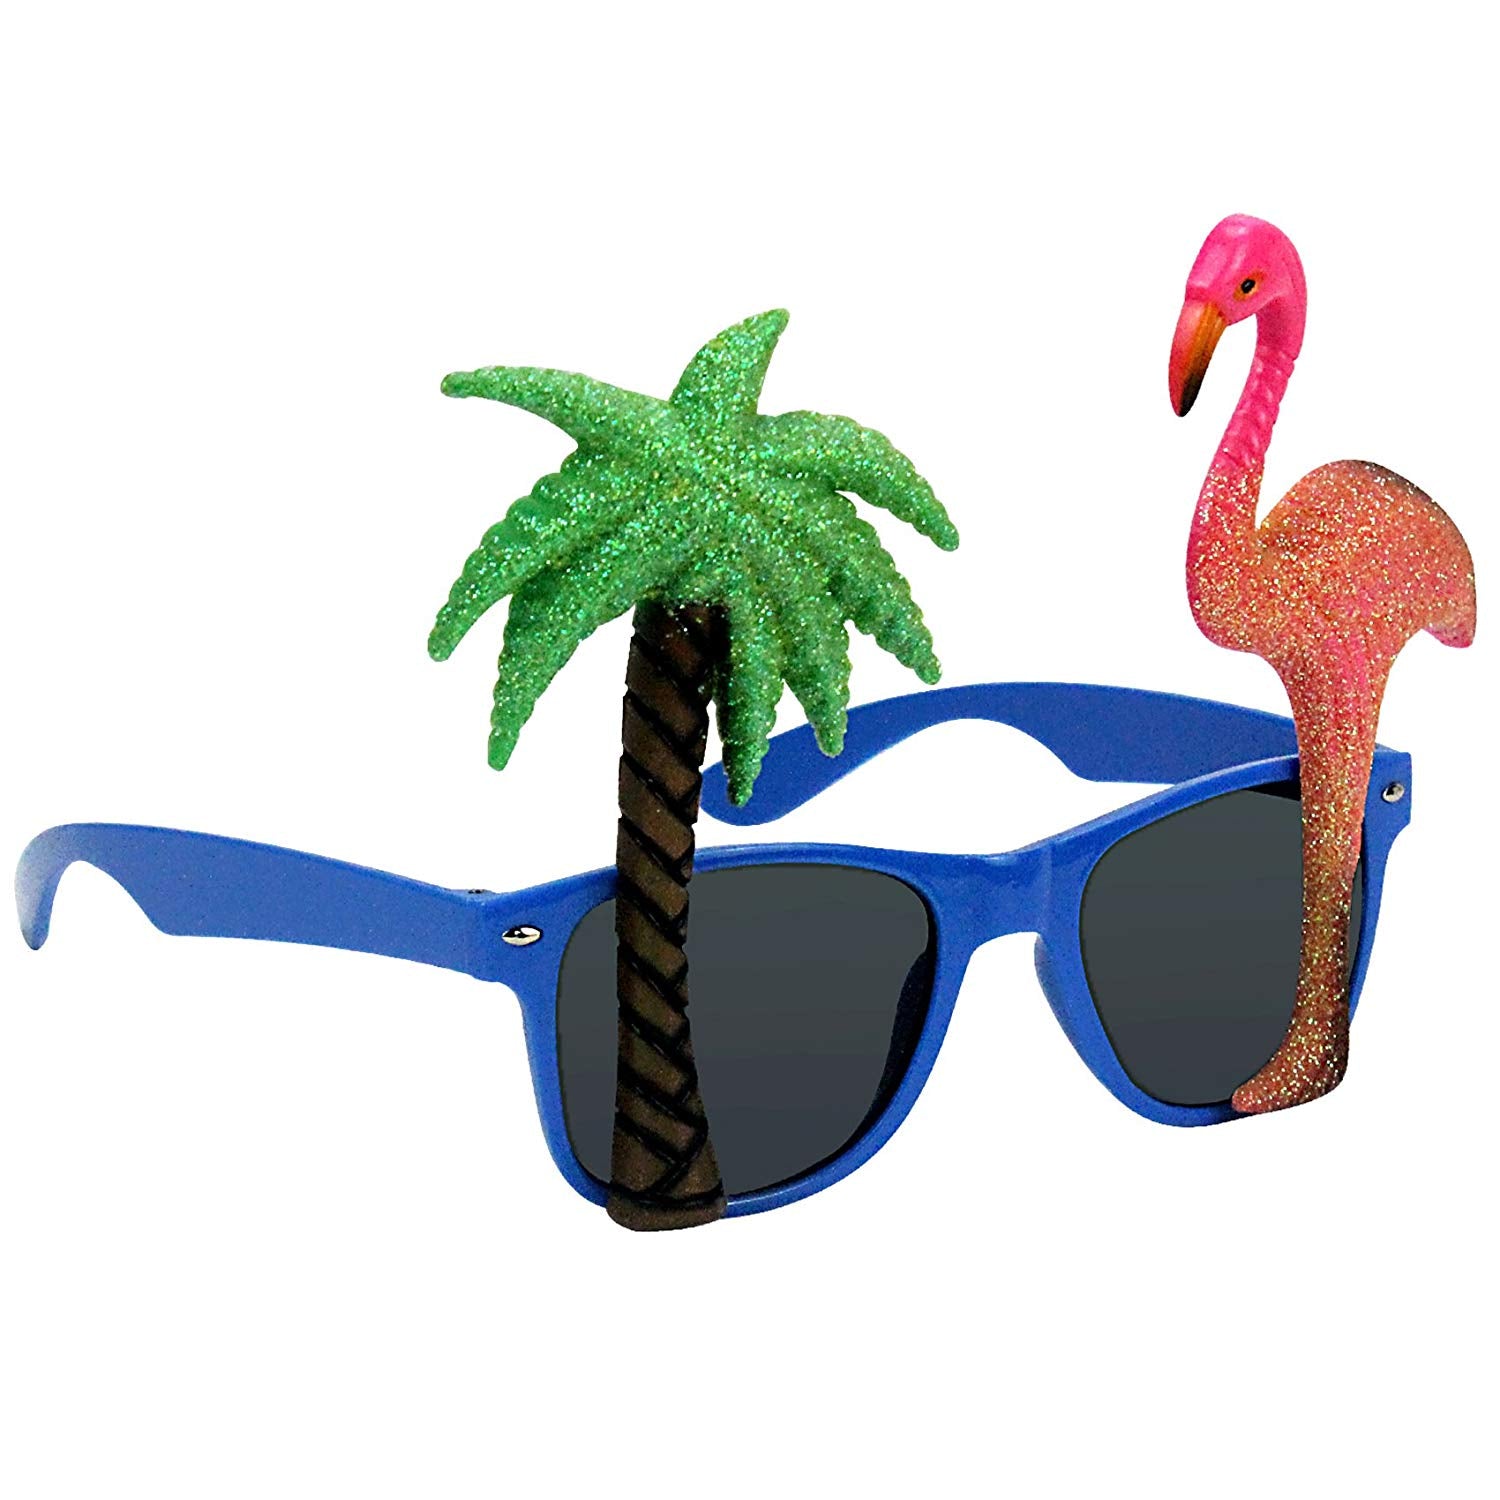 Tropical Party Costume Sunglasses Fun Shades Flamingo and Plam Tree Navy Blue